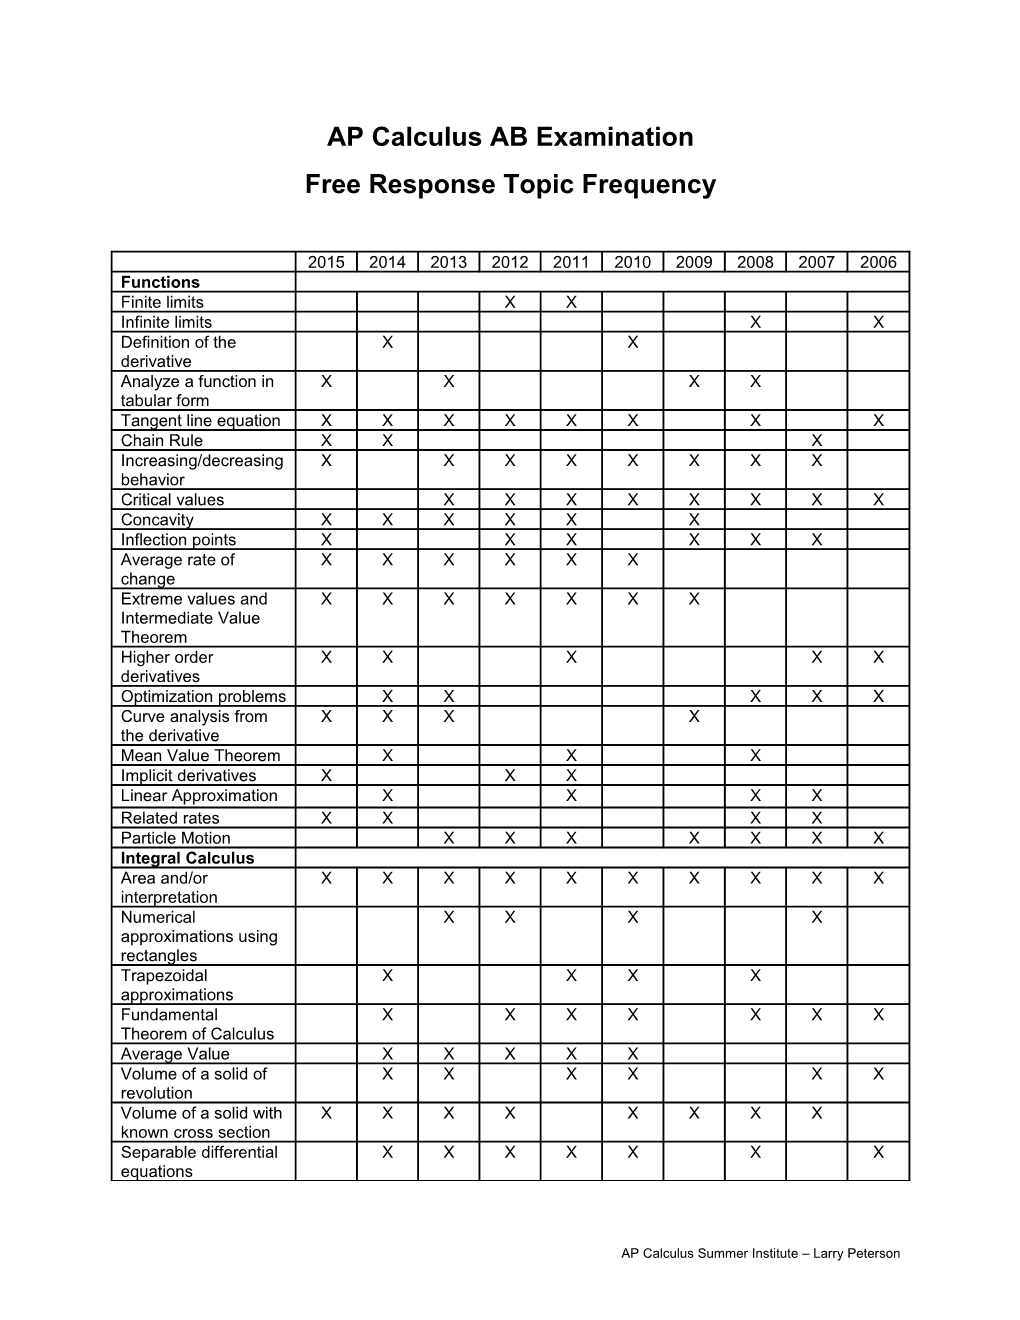 Free Response Topic Frequency